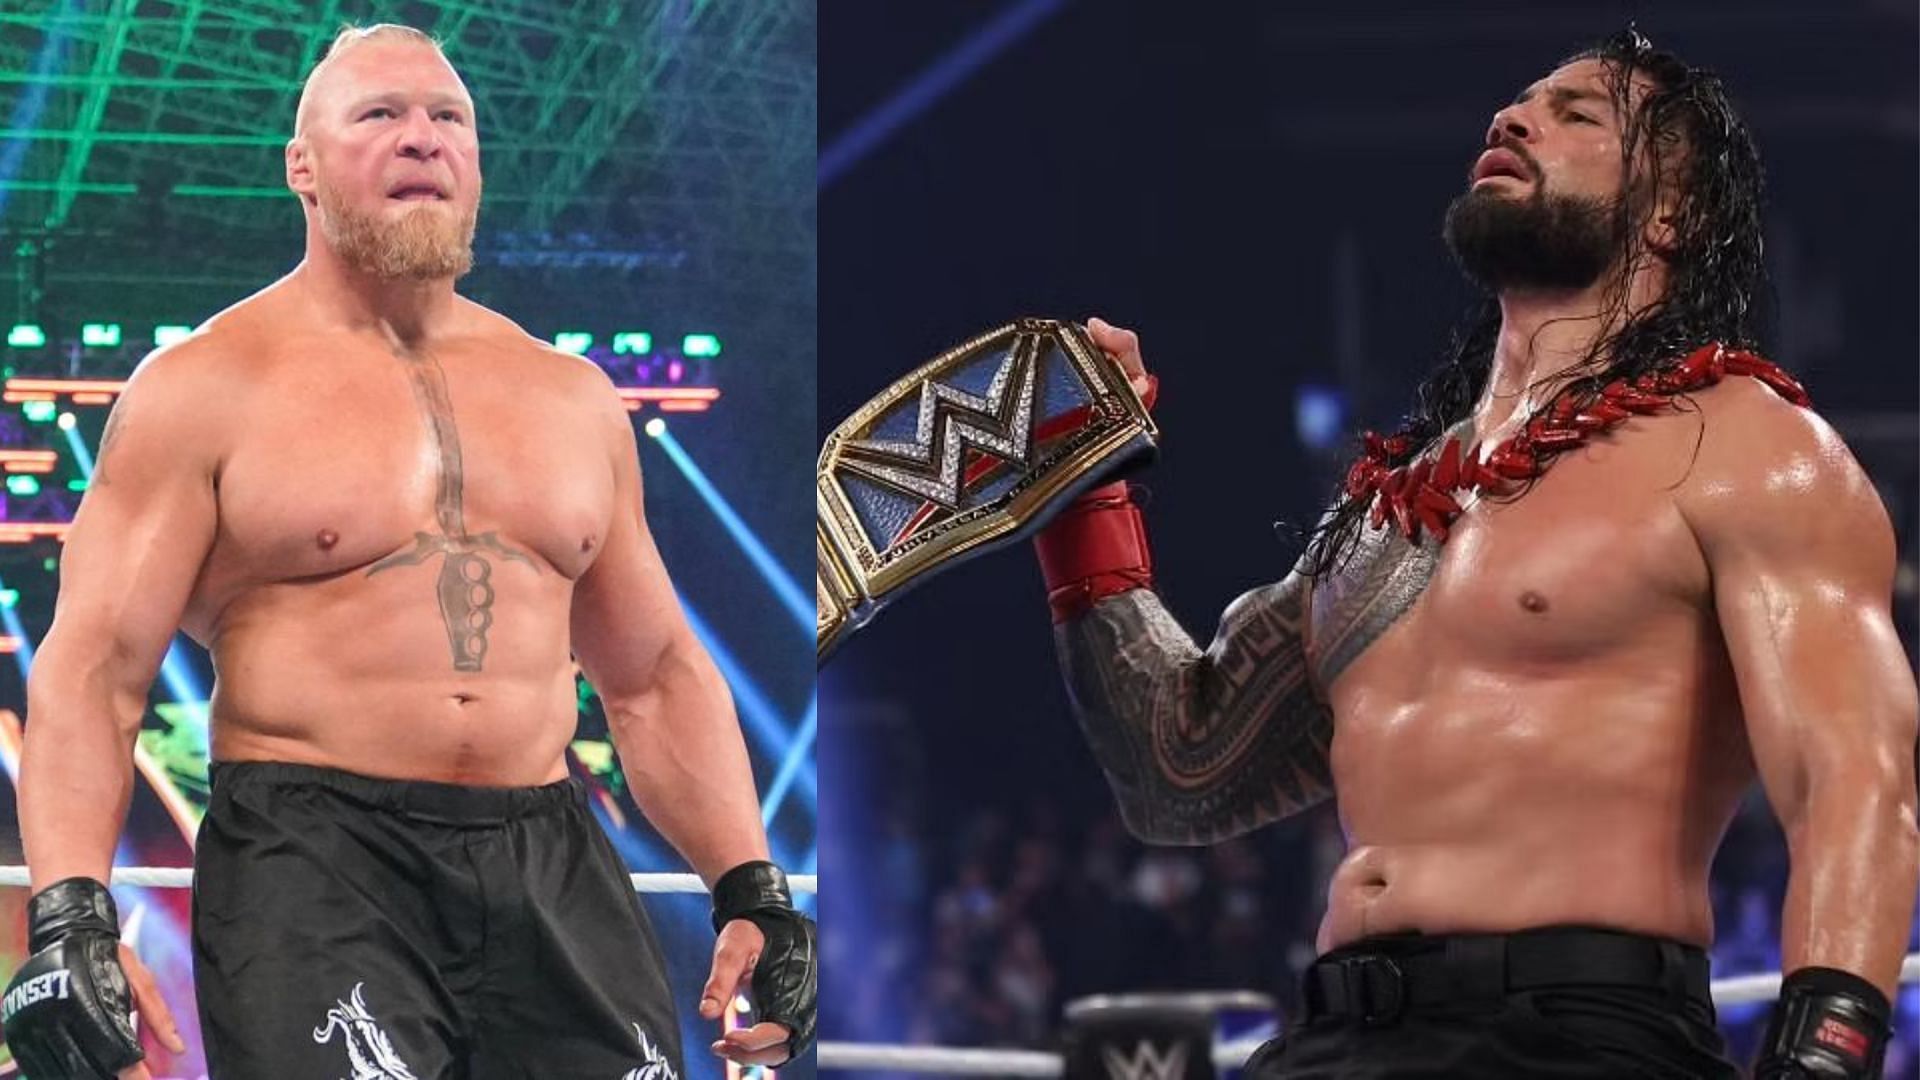 Brock Lesnar and Roman Reigns were among the rumors a lot.